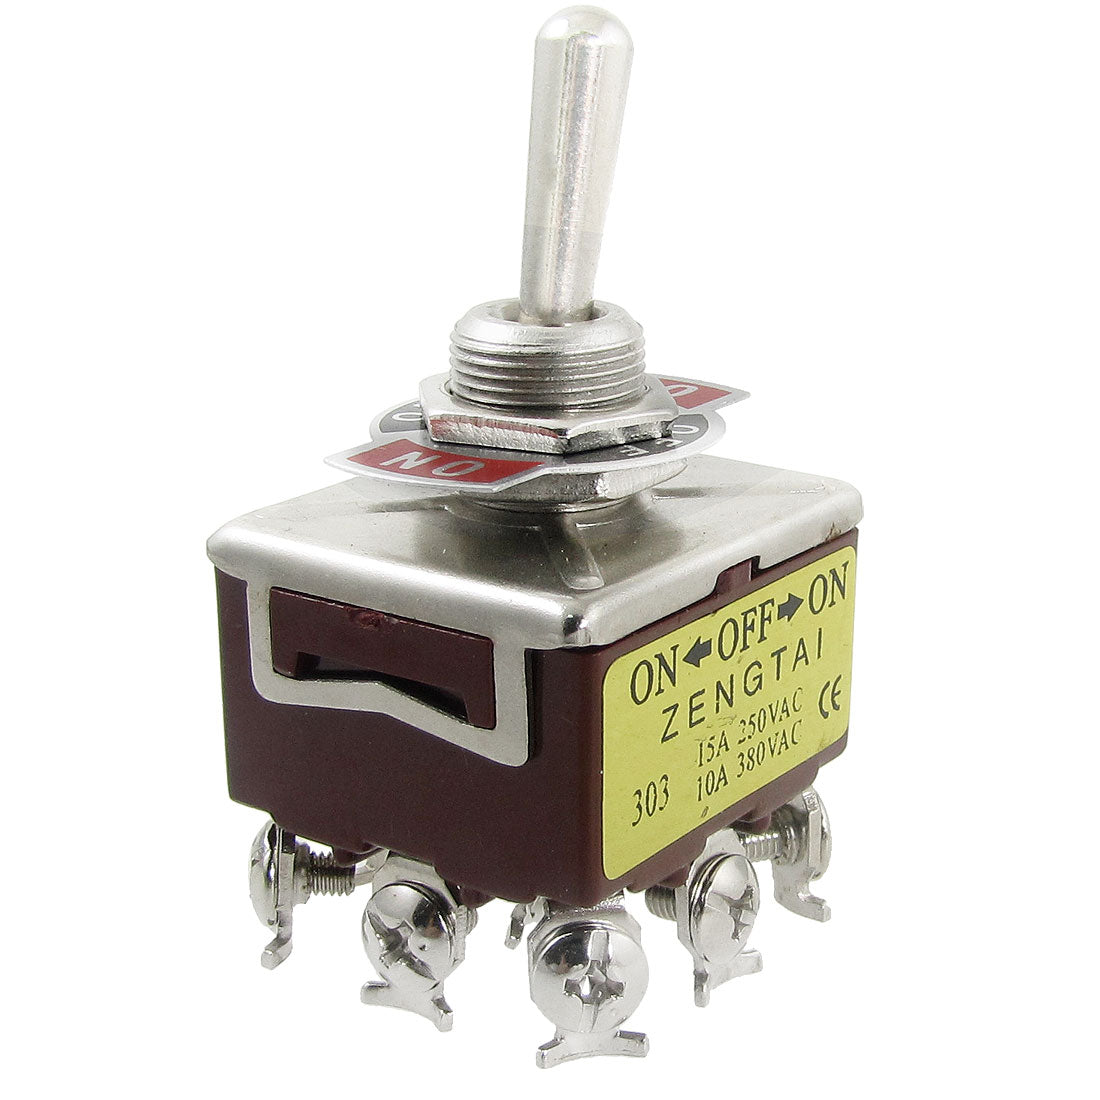 uxcell Uxcell AC 250V 15A 380V 10A ON/OFF/ON 3 Position 3PDT 9 Screw Terminals Toggle Switch